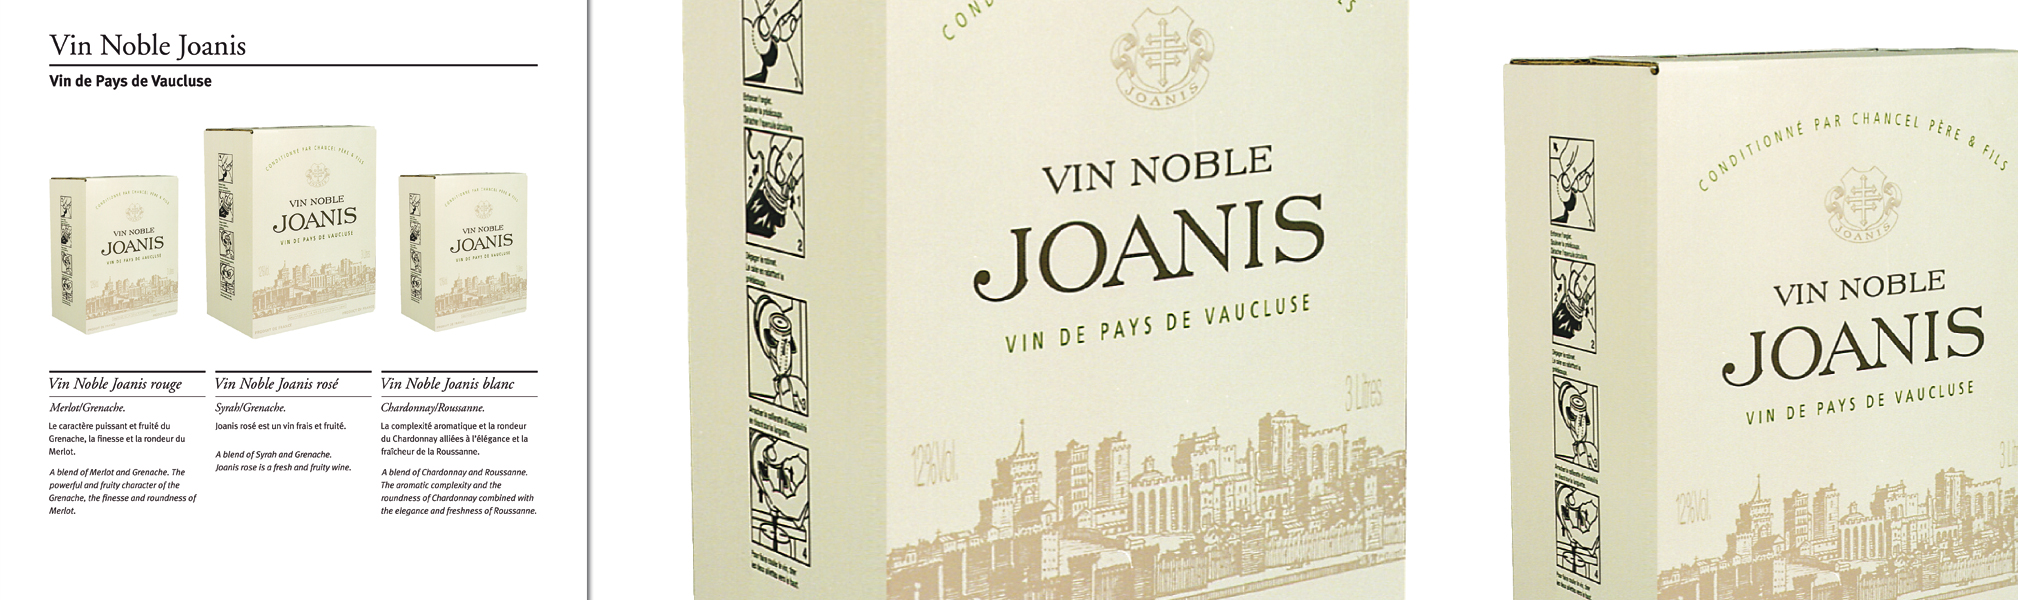 Château Val Joanis - Fiches techniques bag in box